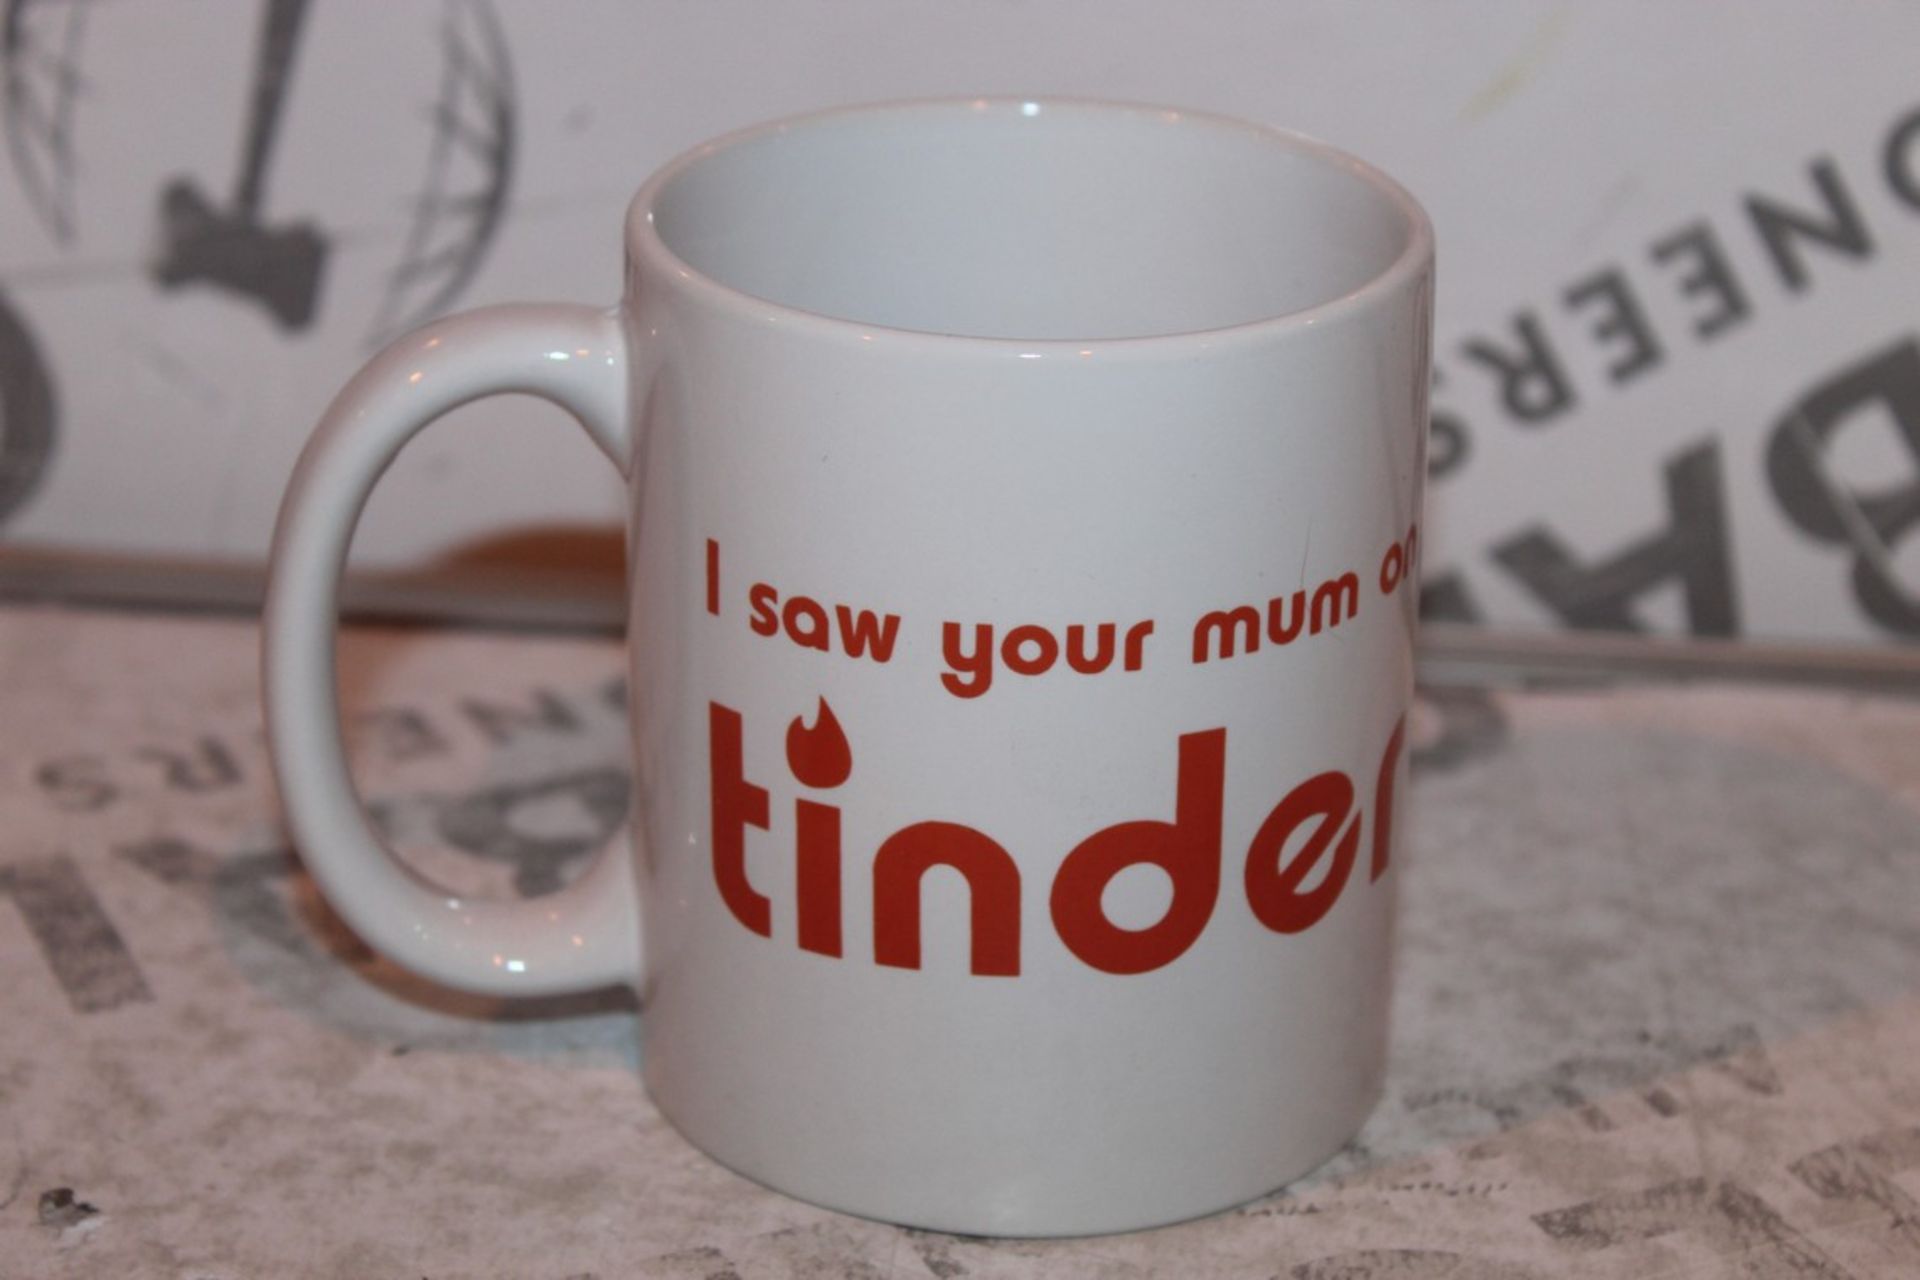 Lot to Contain 24 I Saw Your Mum on Tinder Mugs (Public Viewing and Appraisals Available)